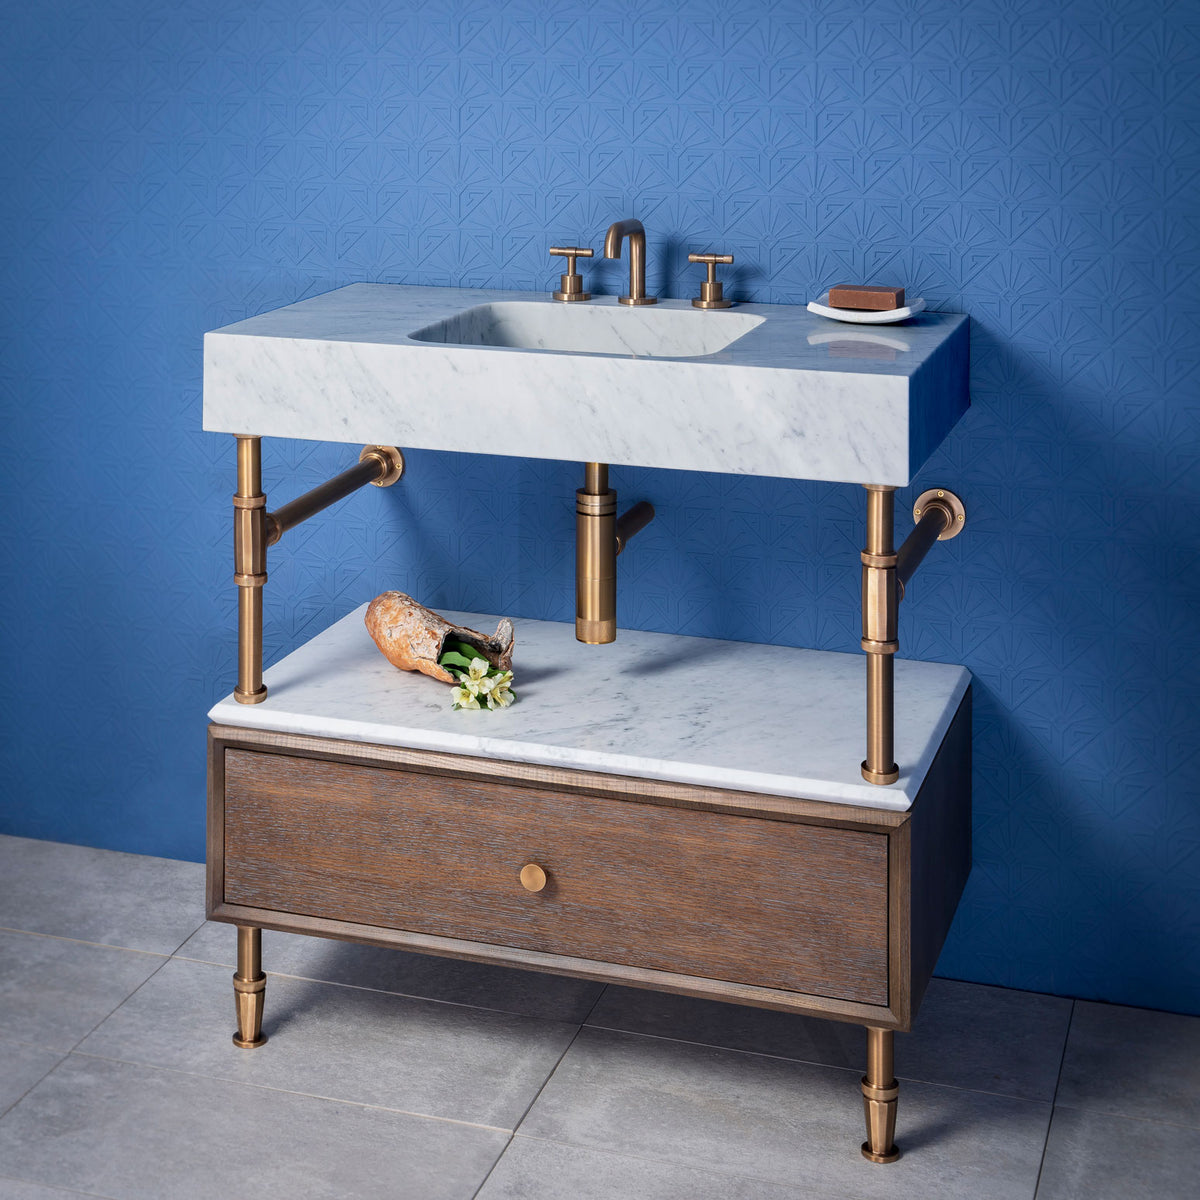 Terra Bath Sink paired with Elemental Facet Drawer Vanity with cap shelf image 2 of 3